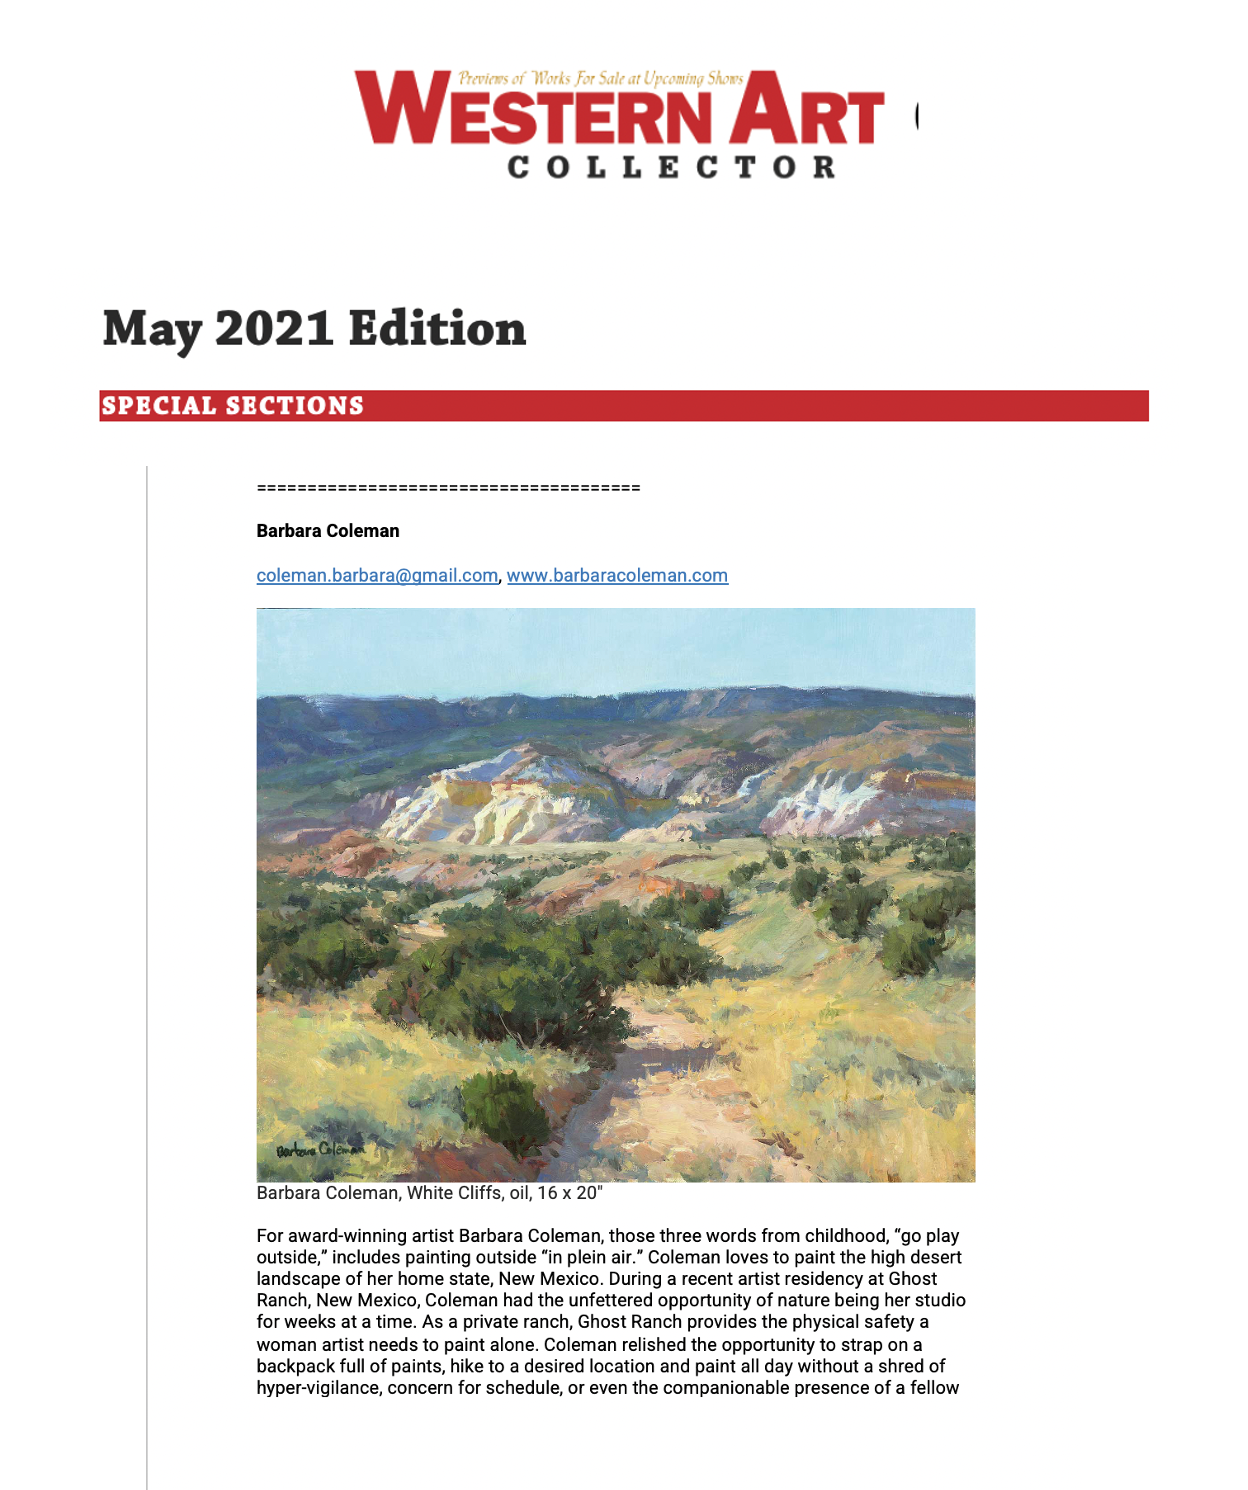 Western Art Collector, May 2021 Edition